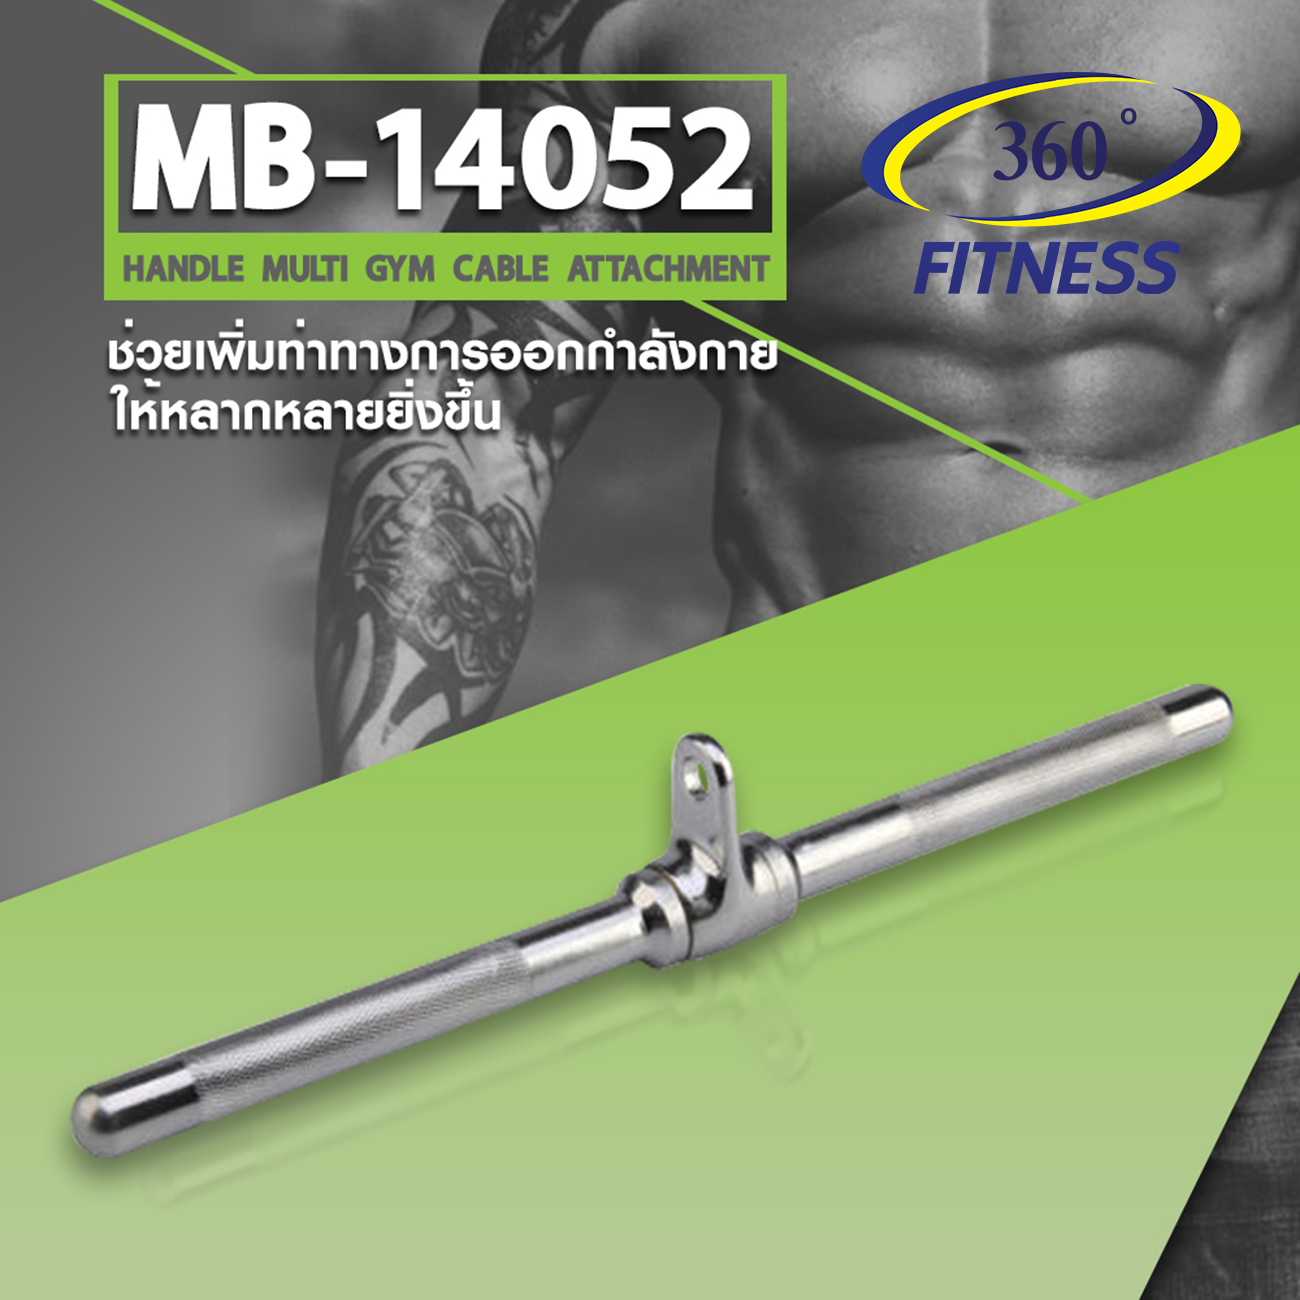 Handle Multi Gym Cable Attachment (MB-14052)